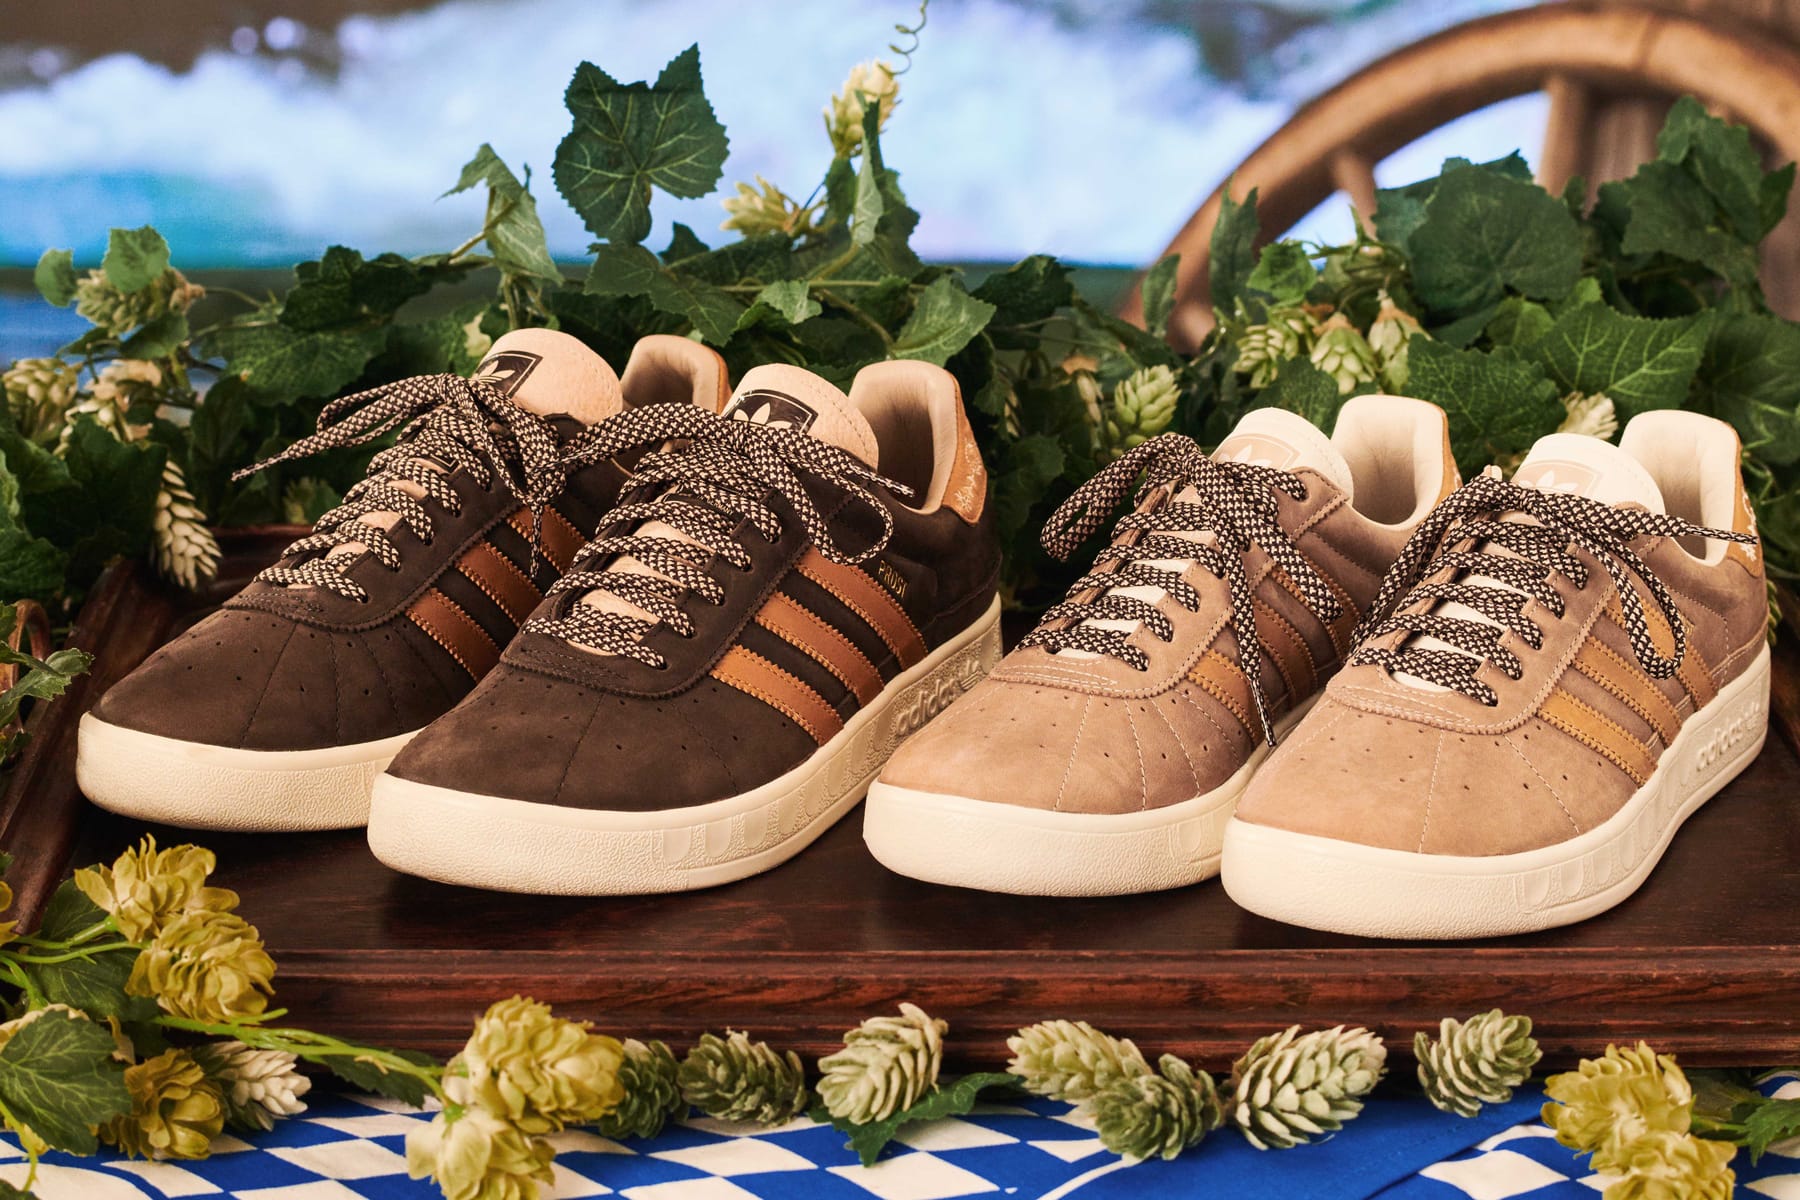 adidas Originals “München Made in Germany” Pack | HYPEBEAST فبل